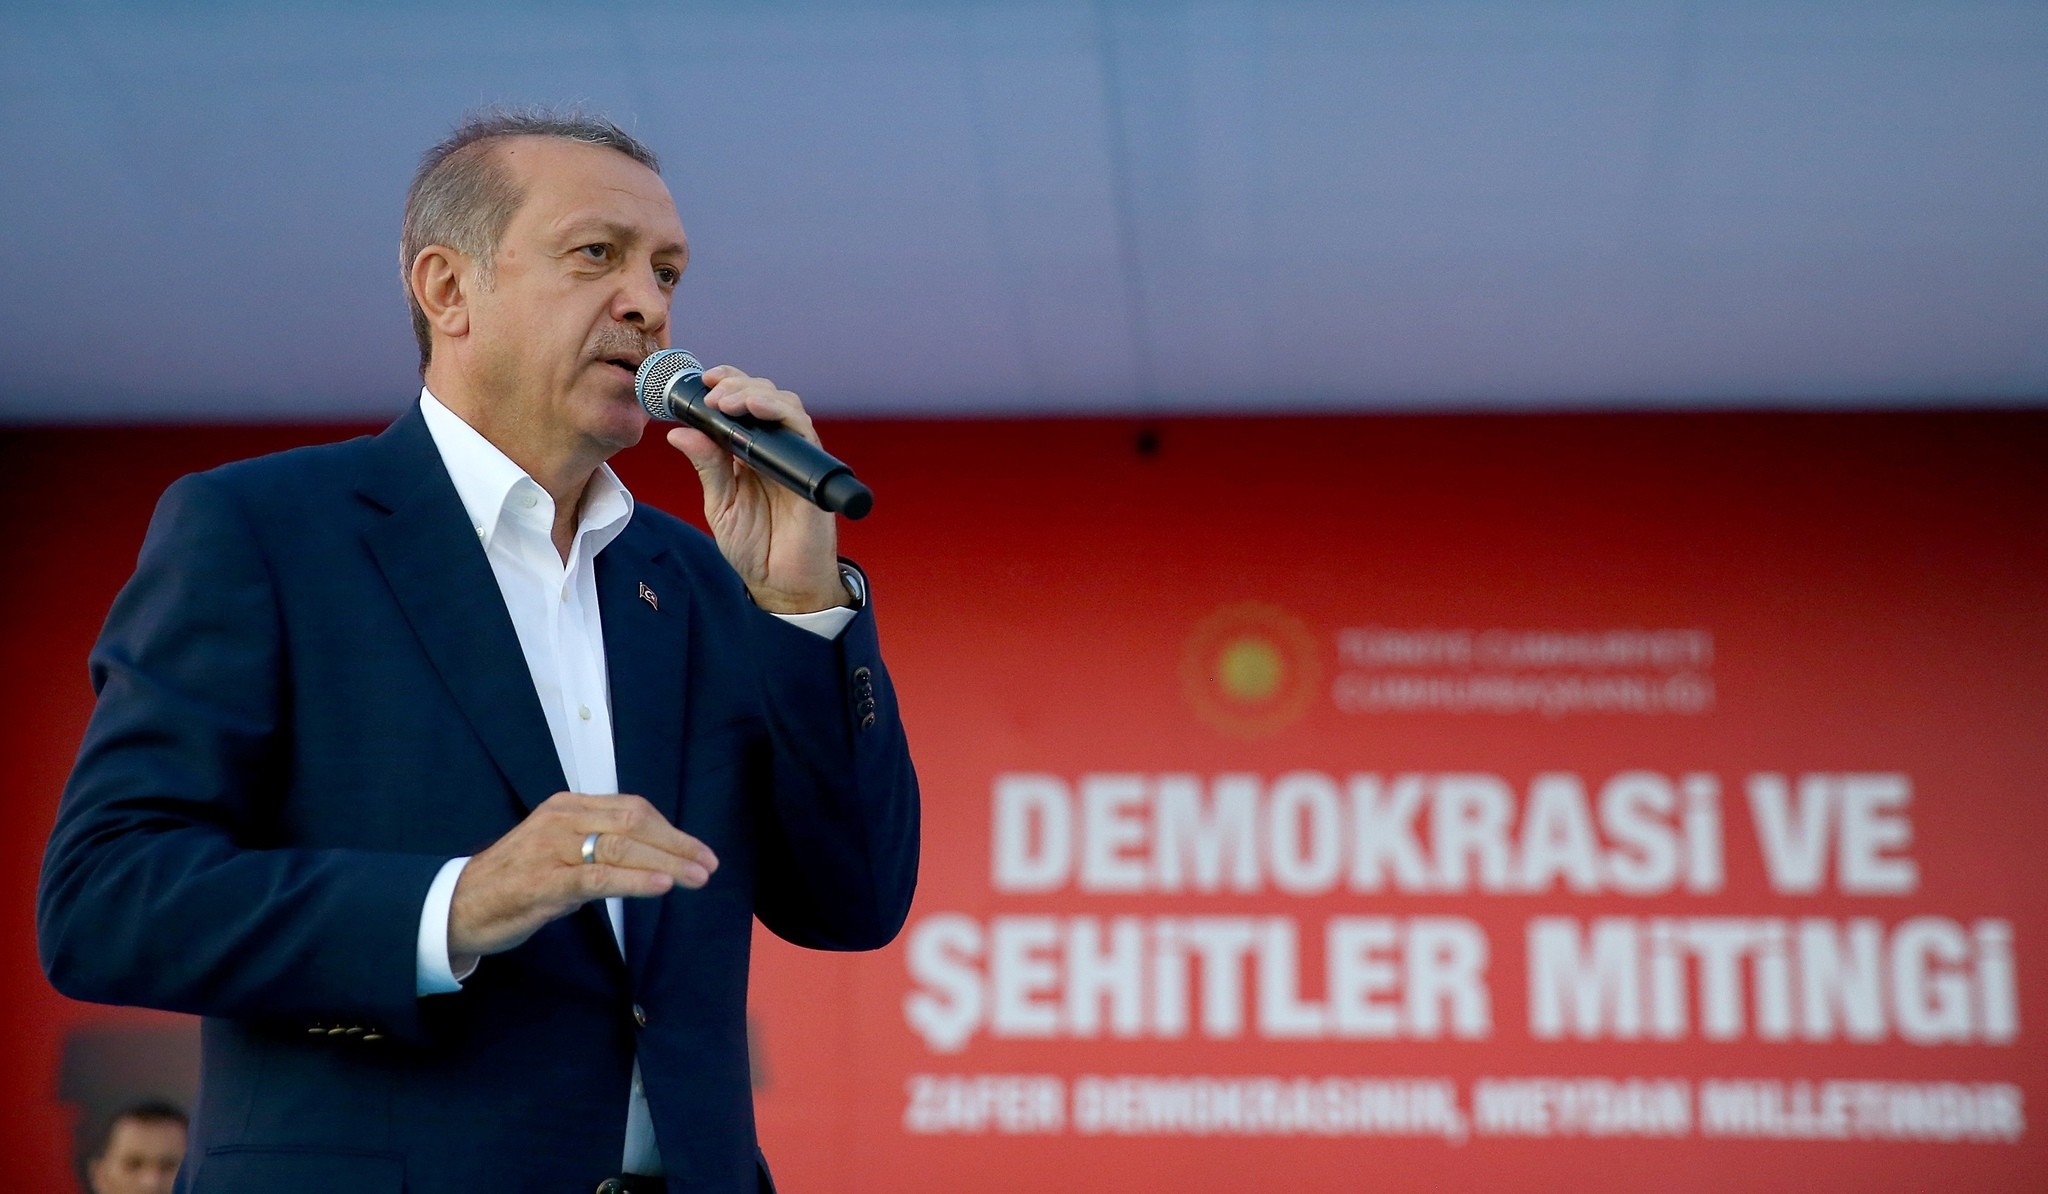 Turkish President Recep Tayyip Erdogan delivers a speech during a Democracy and Martyrs' Rally in Istanbul, Sunday, Aug. 7, 2016. (AP Photo)